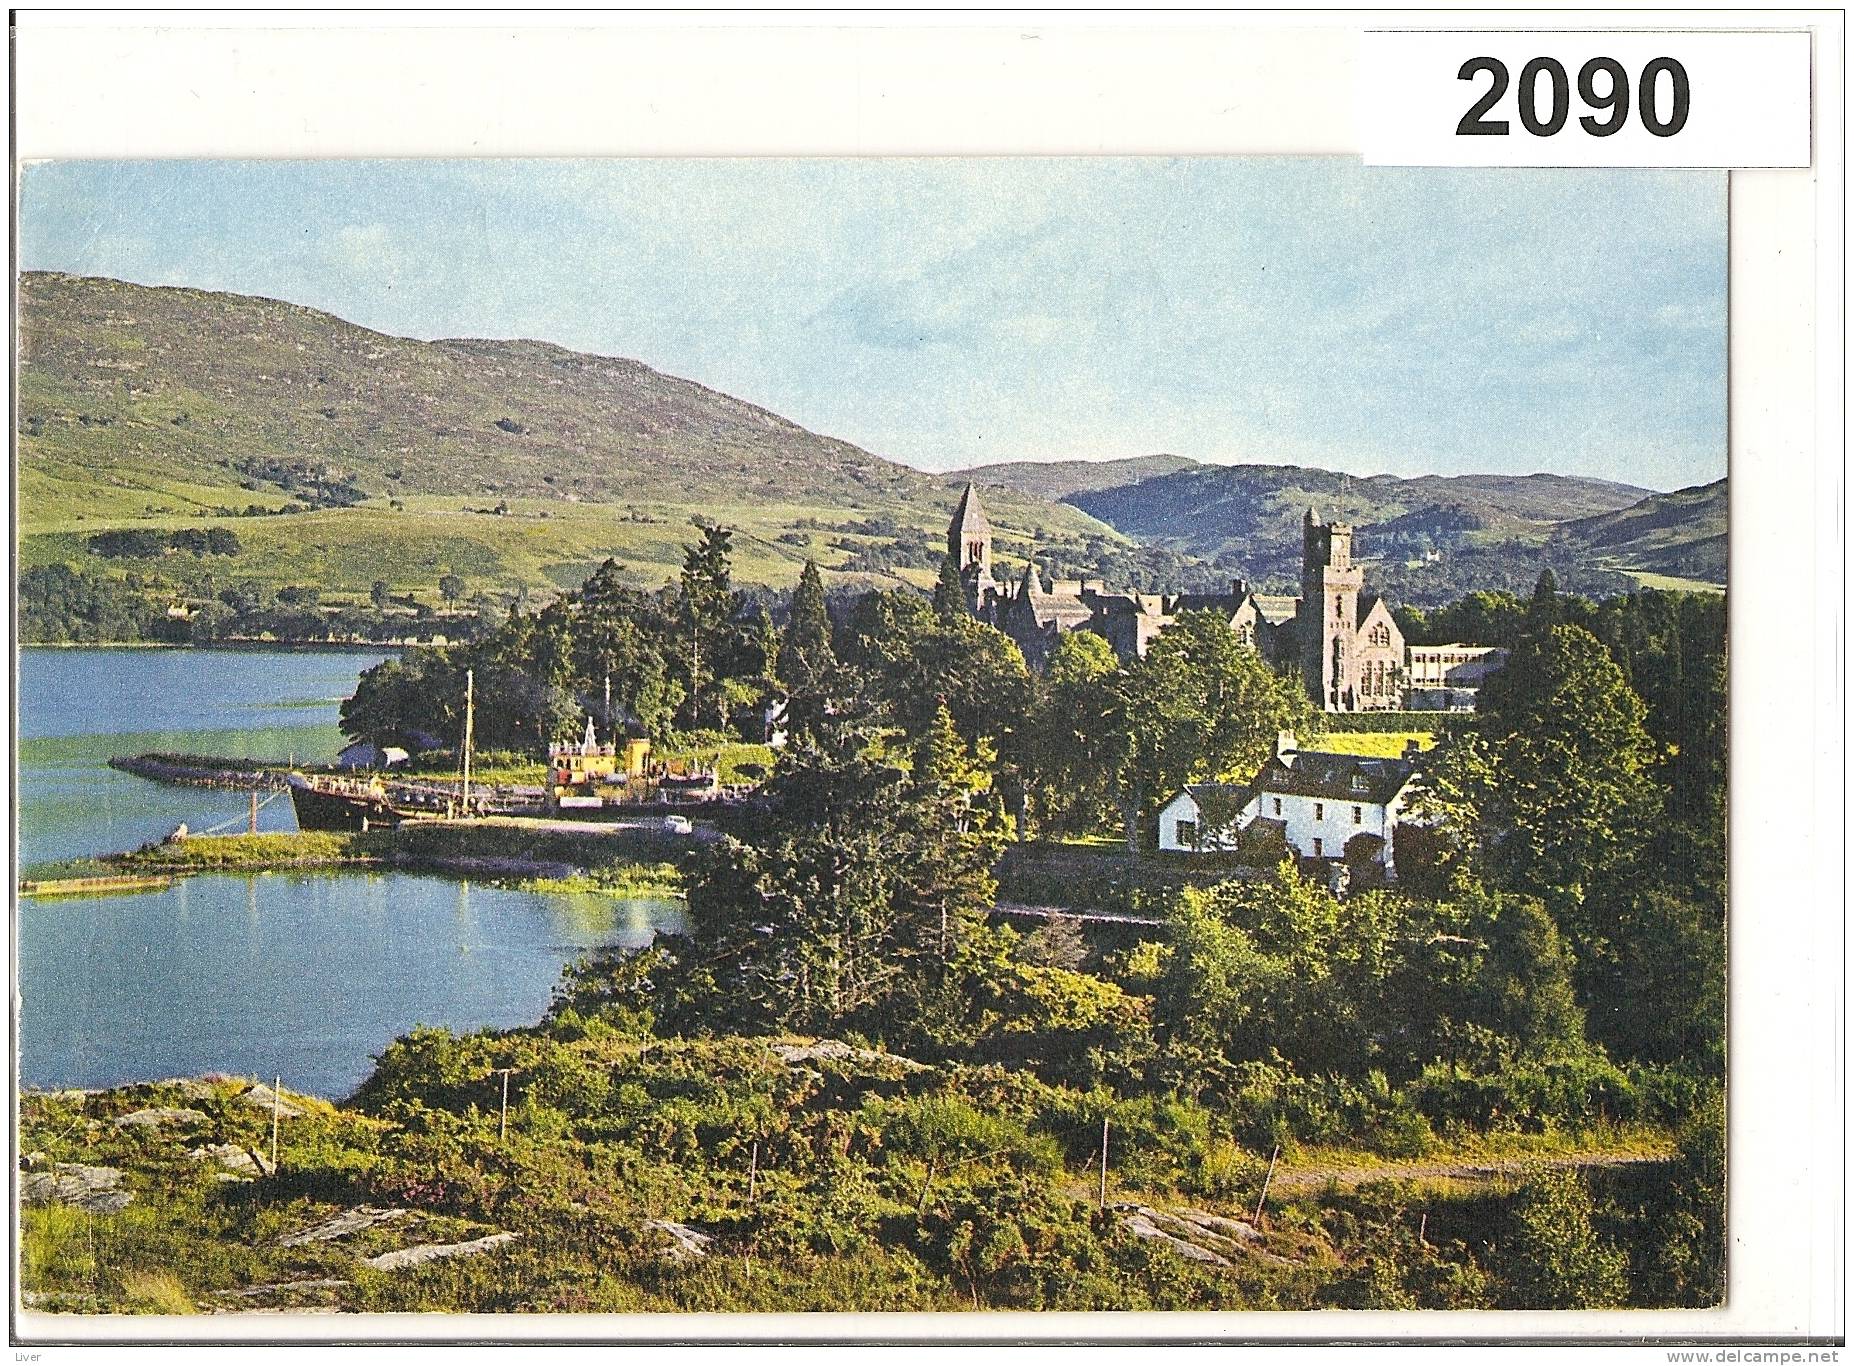 The Abbey Fort Augustus 1967 - Inverness-shire